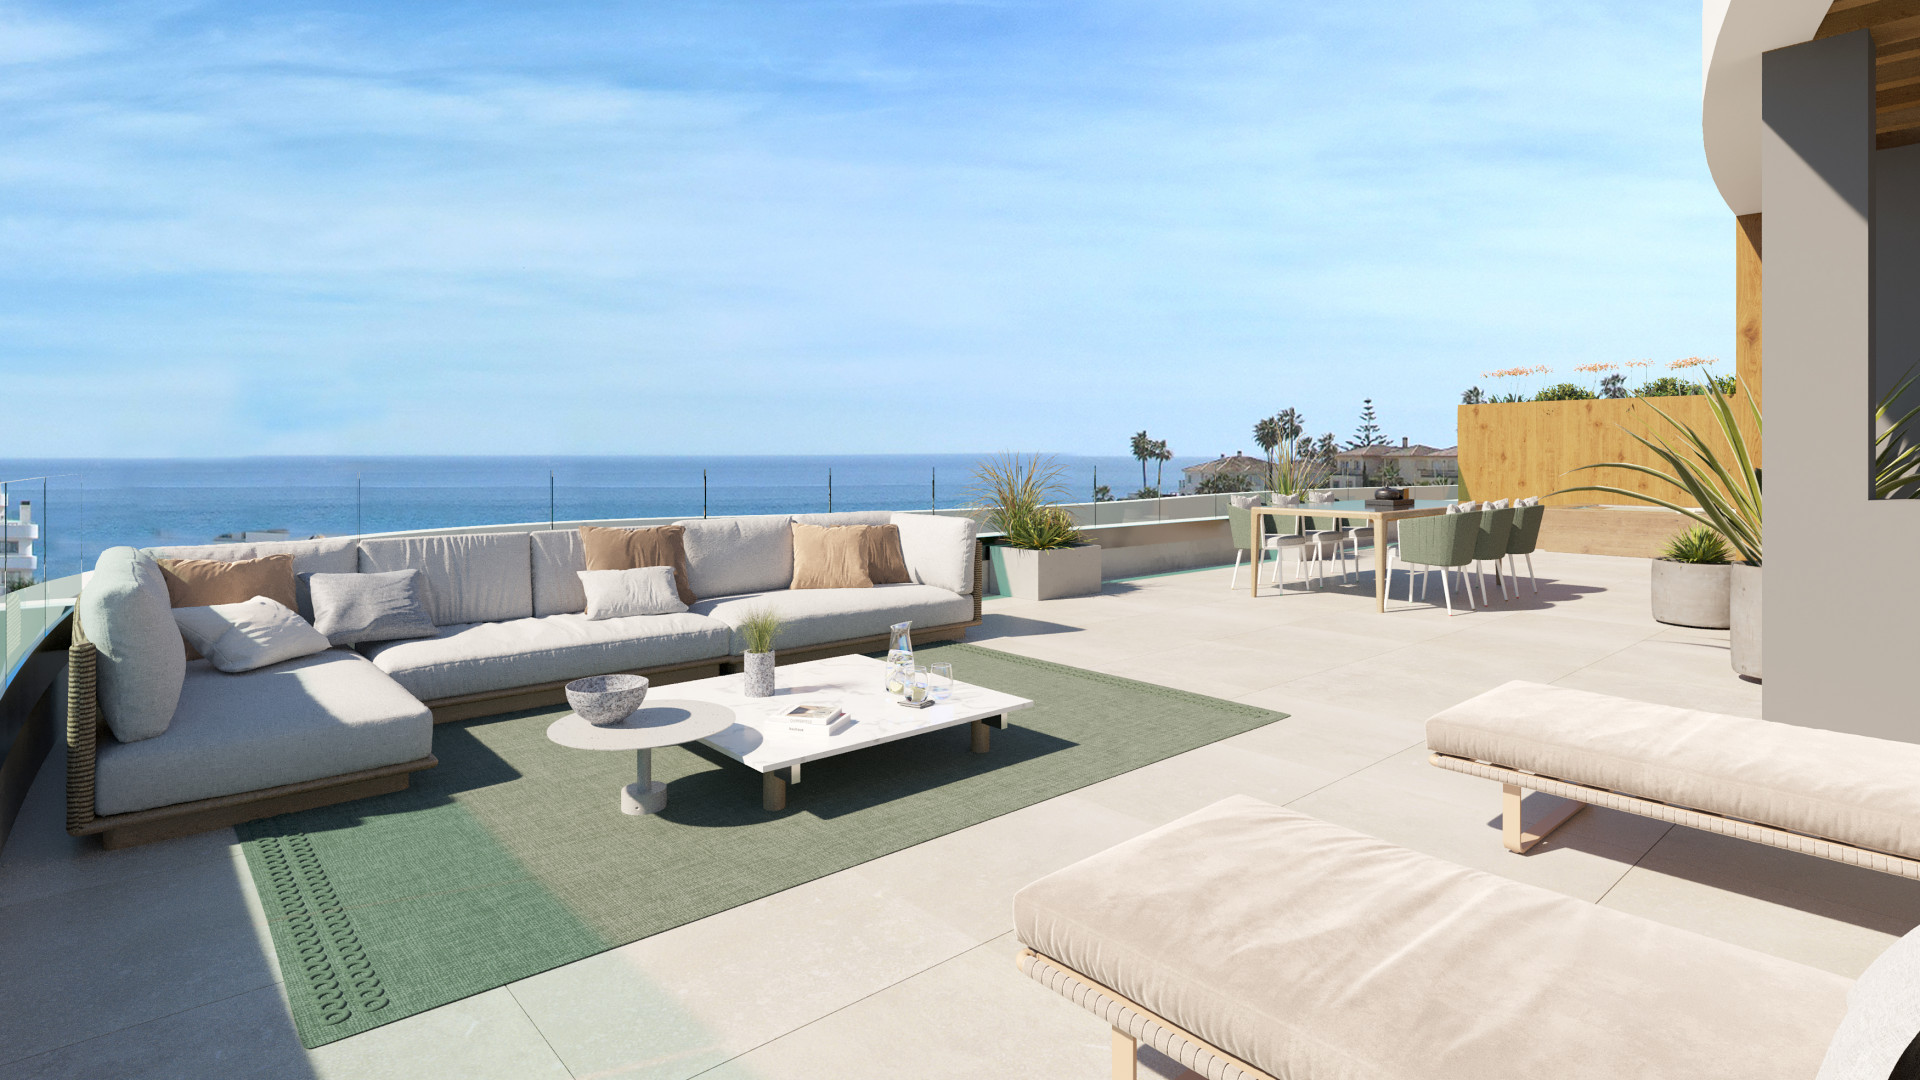 Elysea Suites: New residential project comprising 22 homes located in the Mijas Costa area. | Image 1